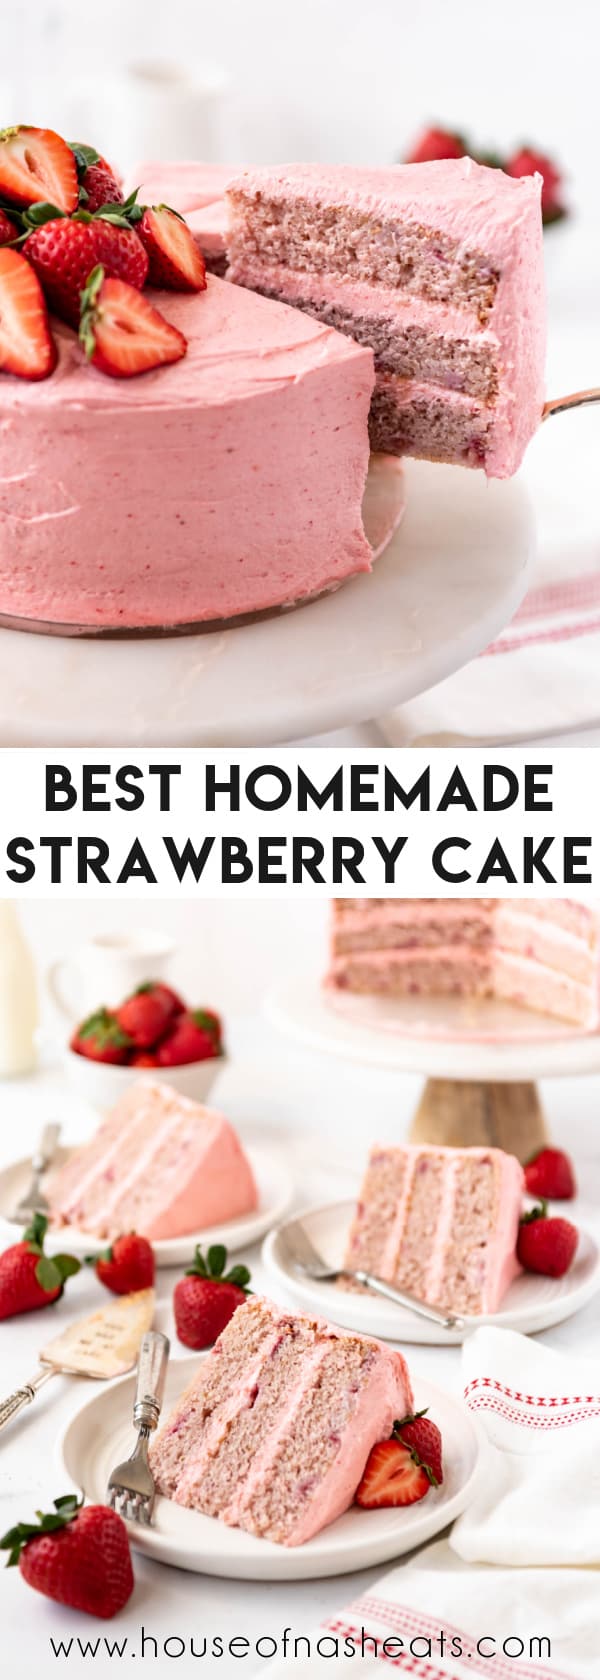 A collage of images of strawberry cake with text overlay.